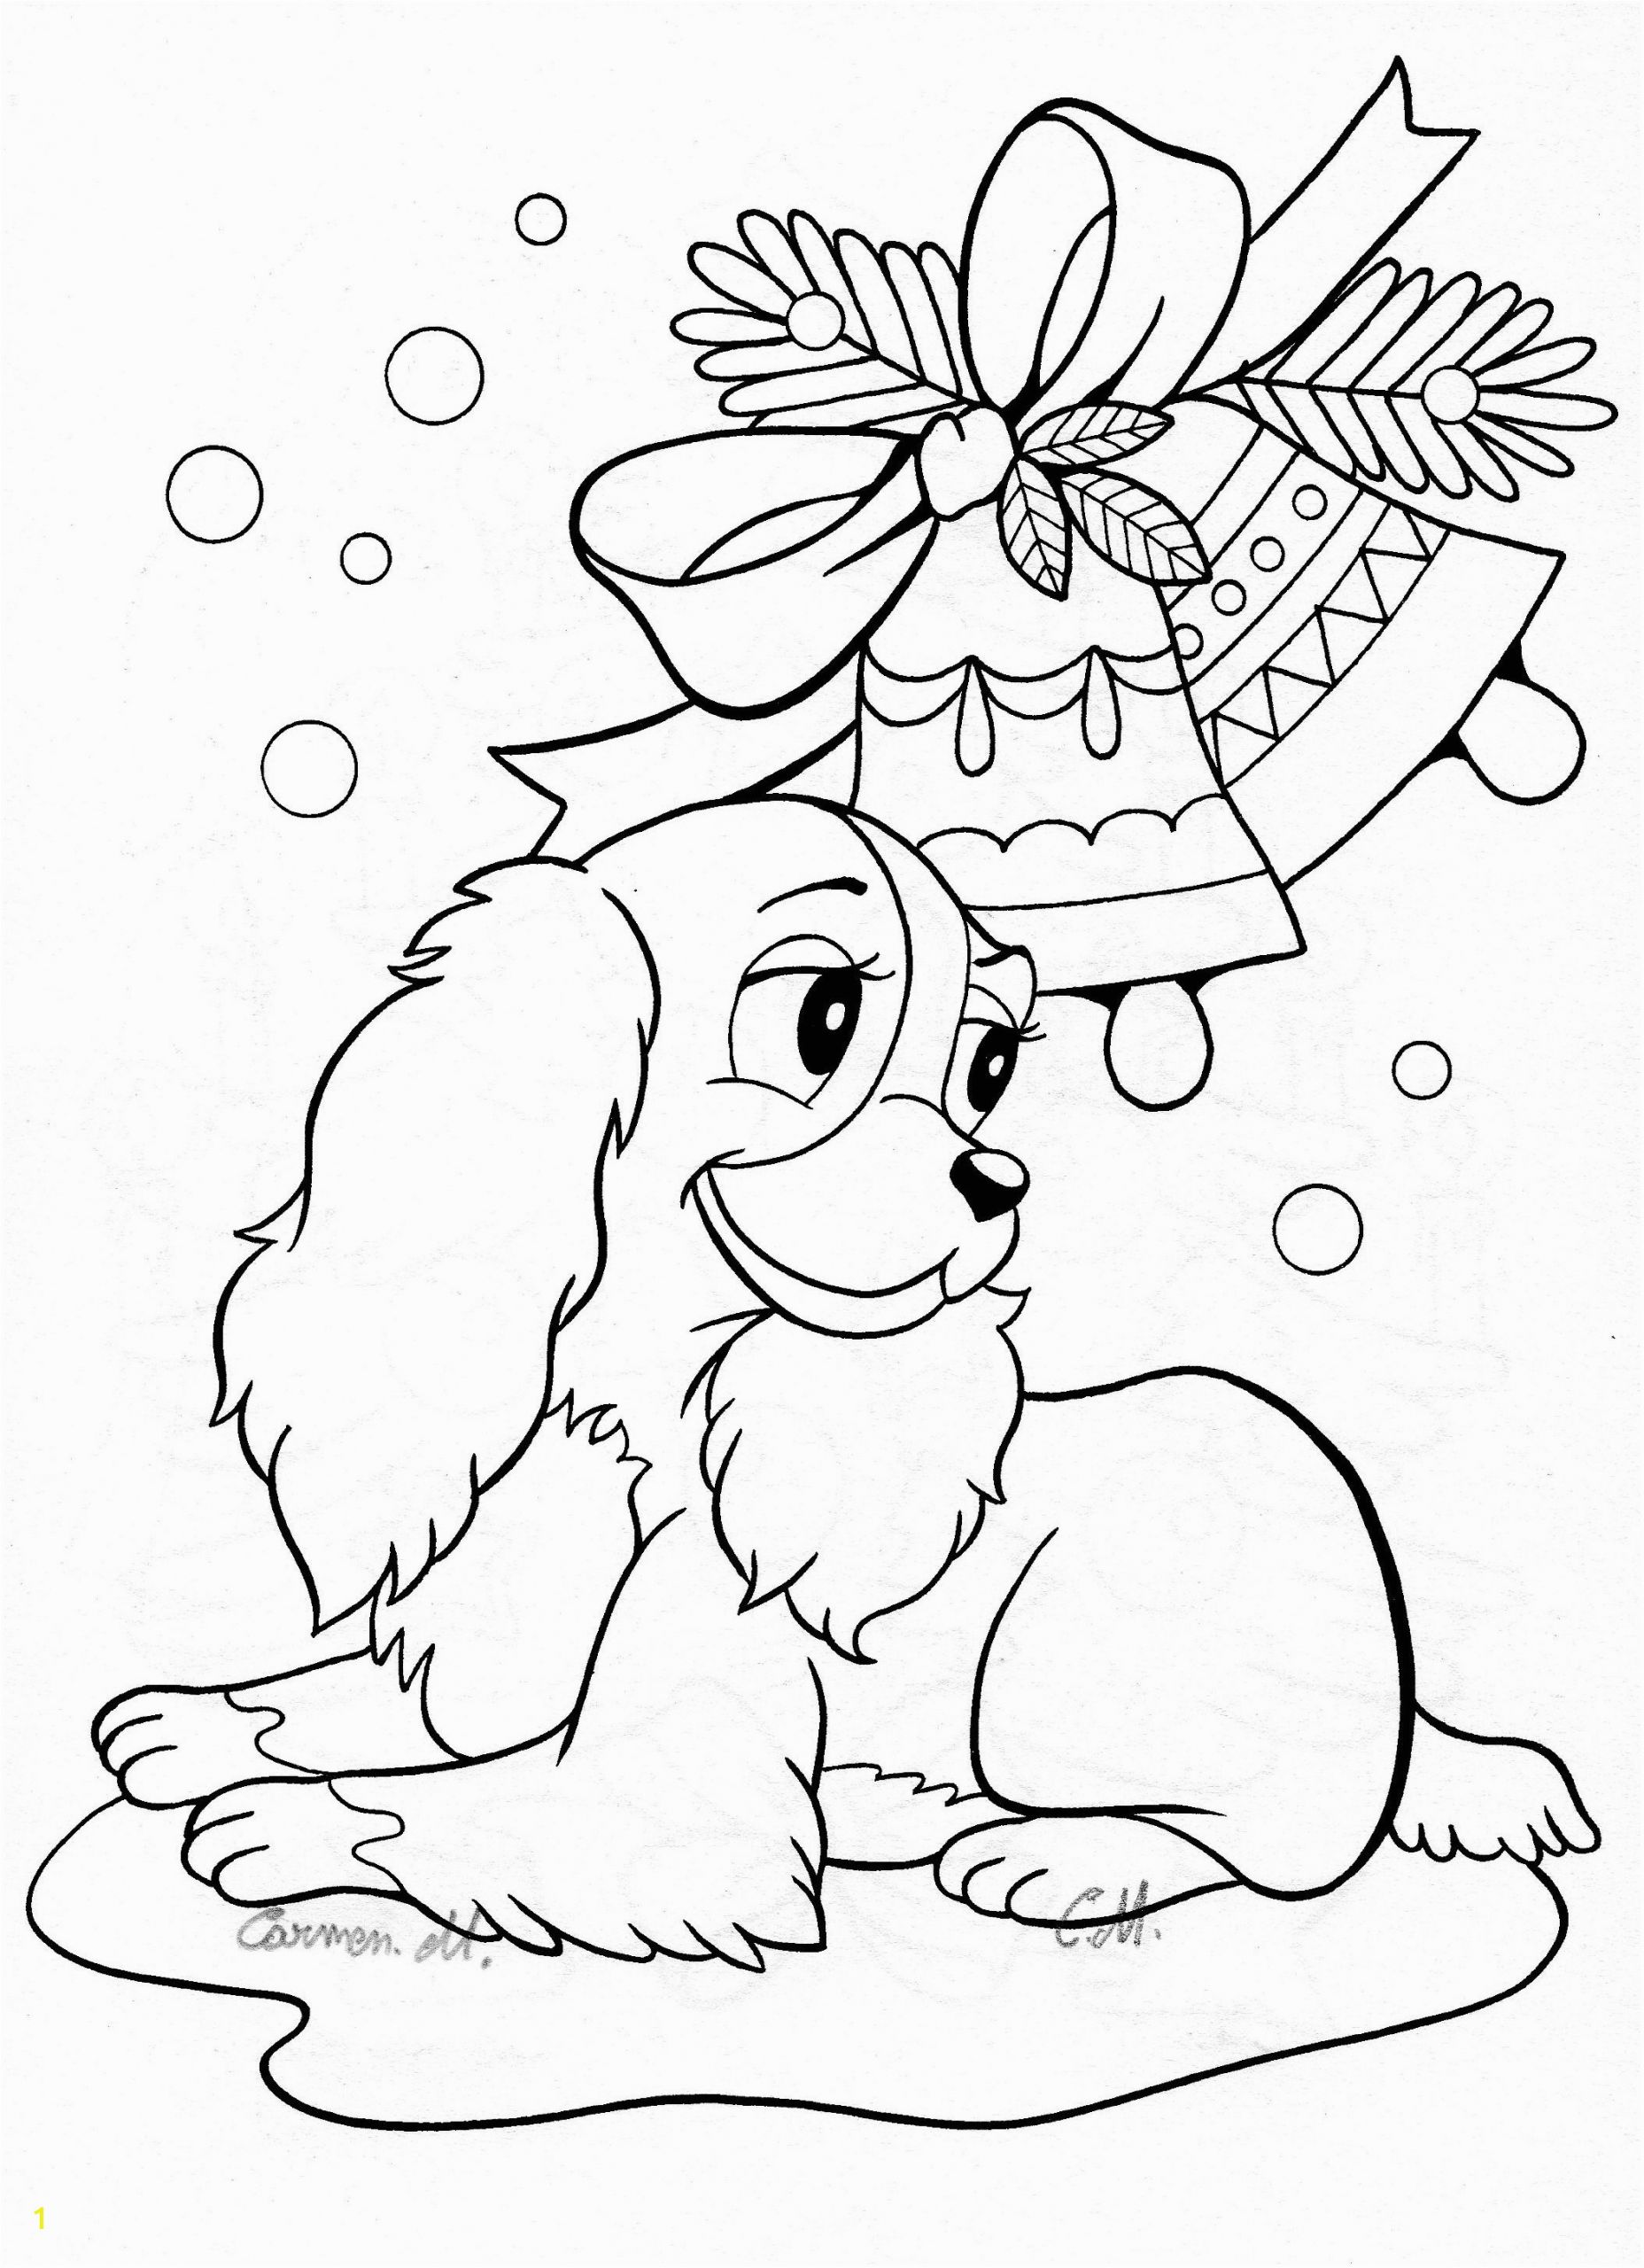 Free Printable Coloring Pages for Winter Best Coloring Christmas Pet Pages Fresh Printable Od Dog